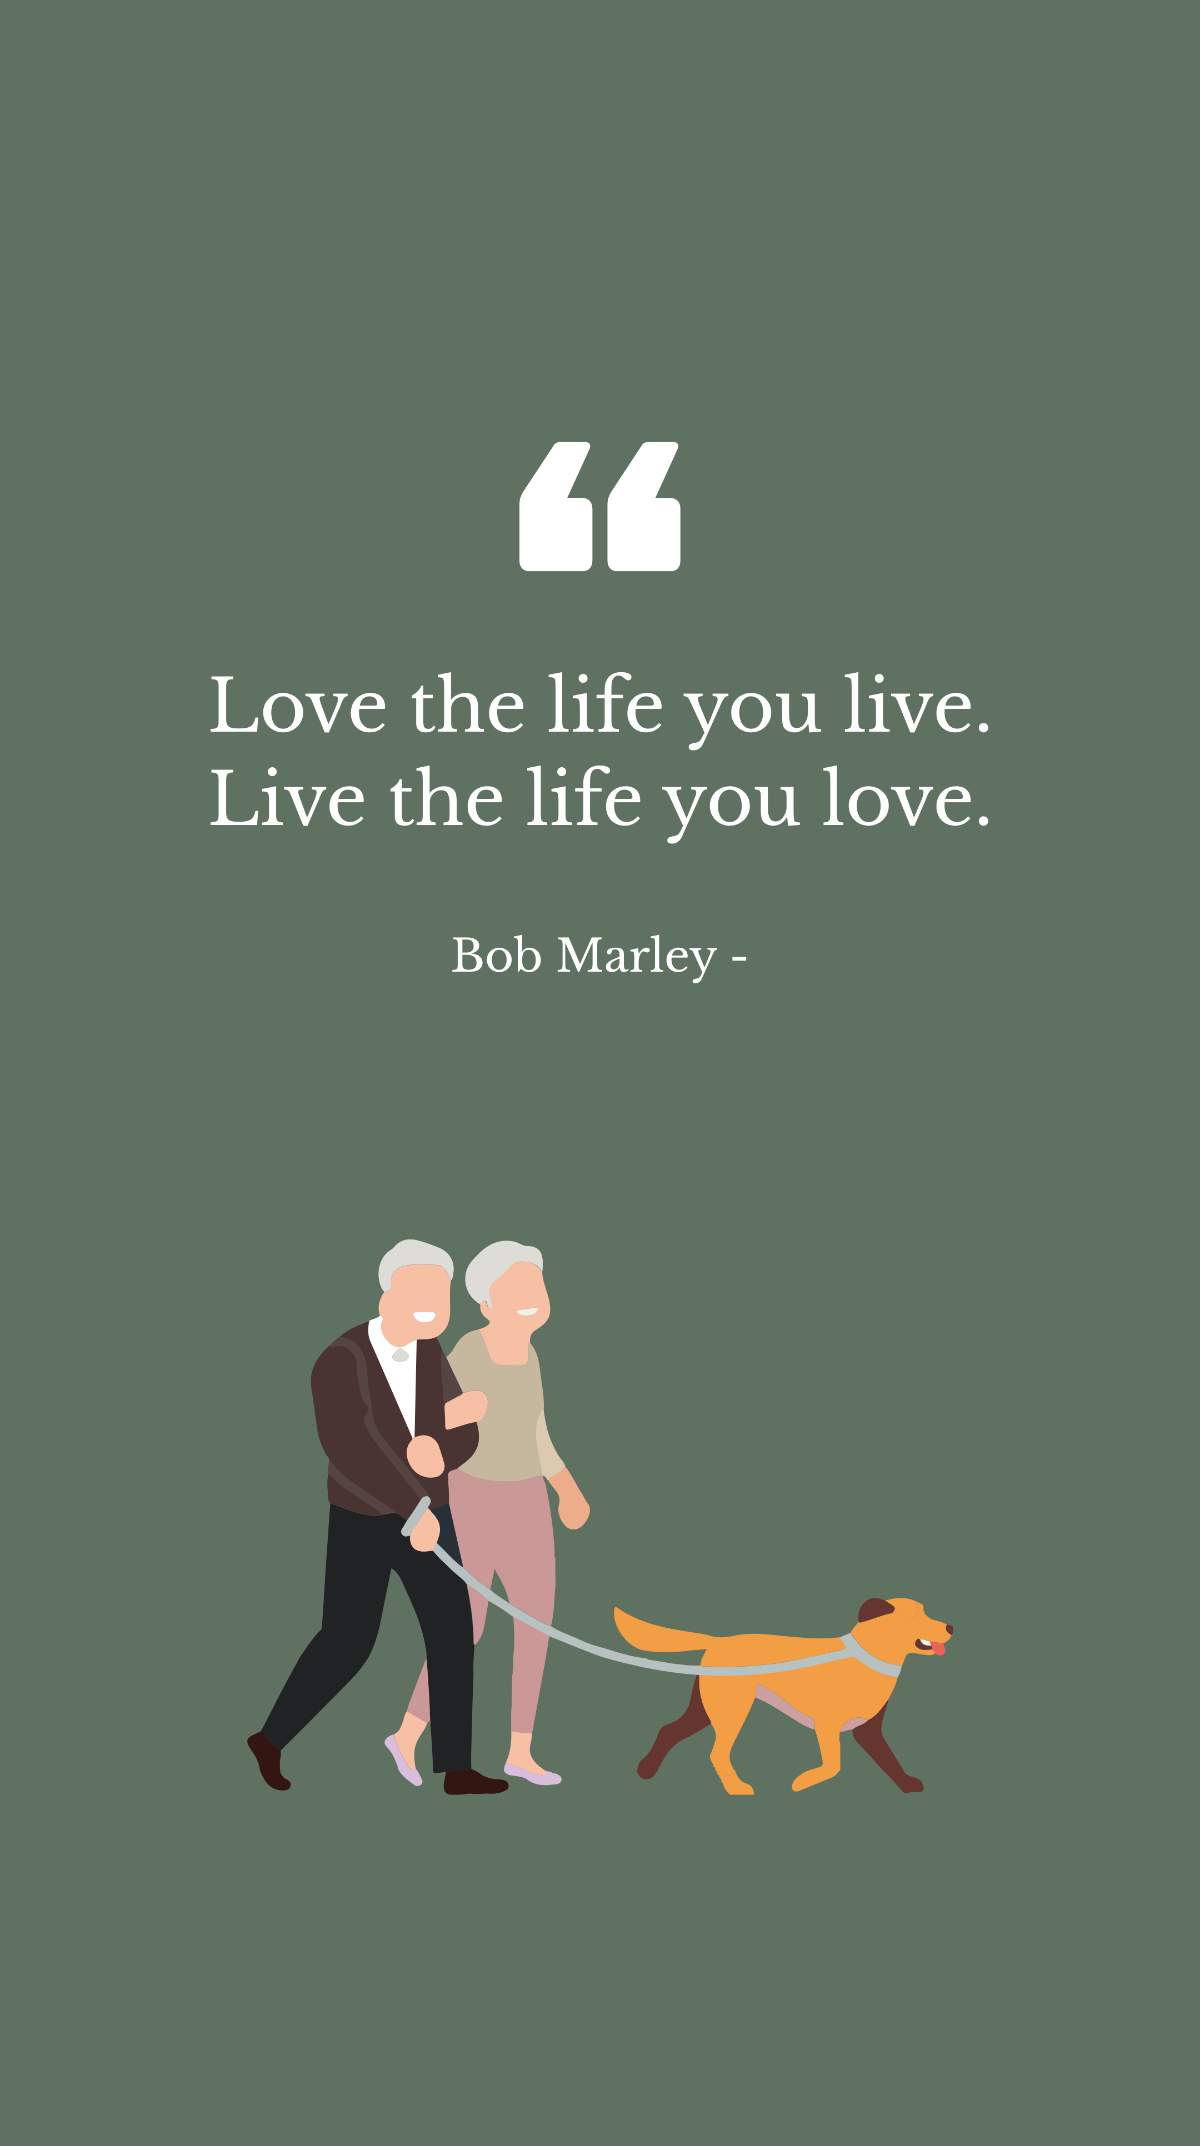 Bob Marley - Love the life you live. Live the life you love. Template